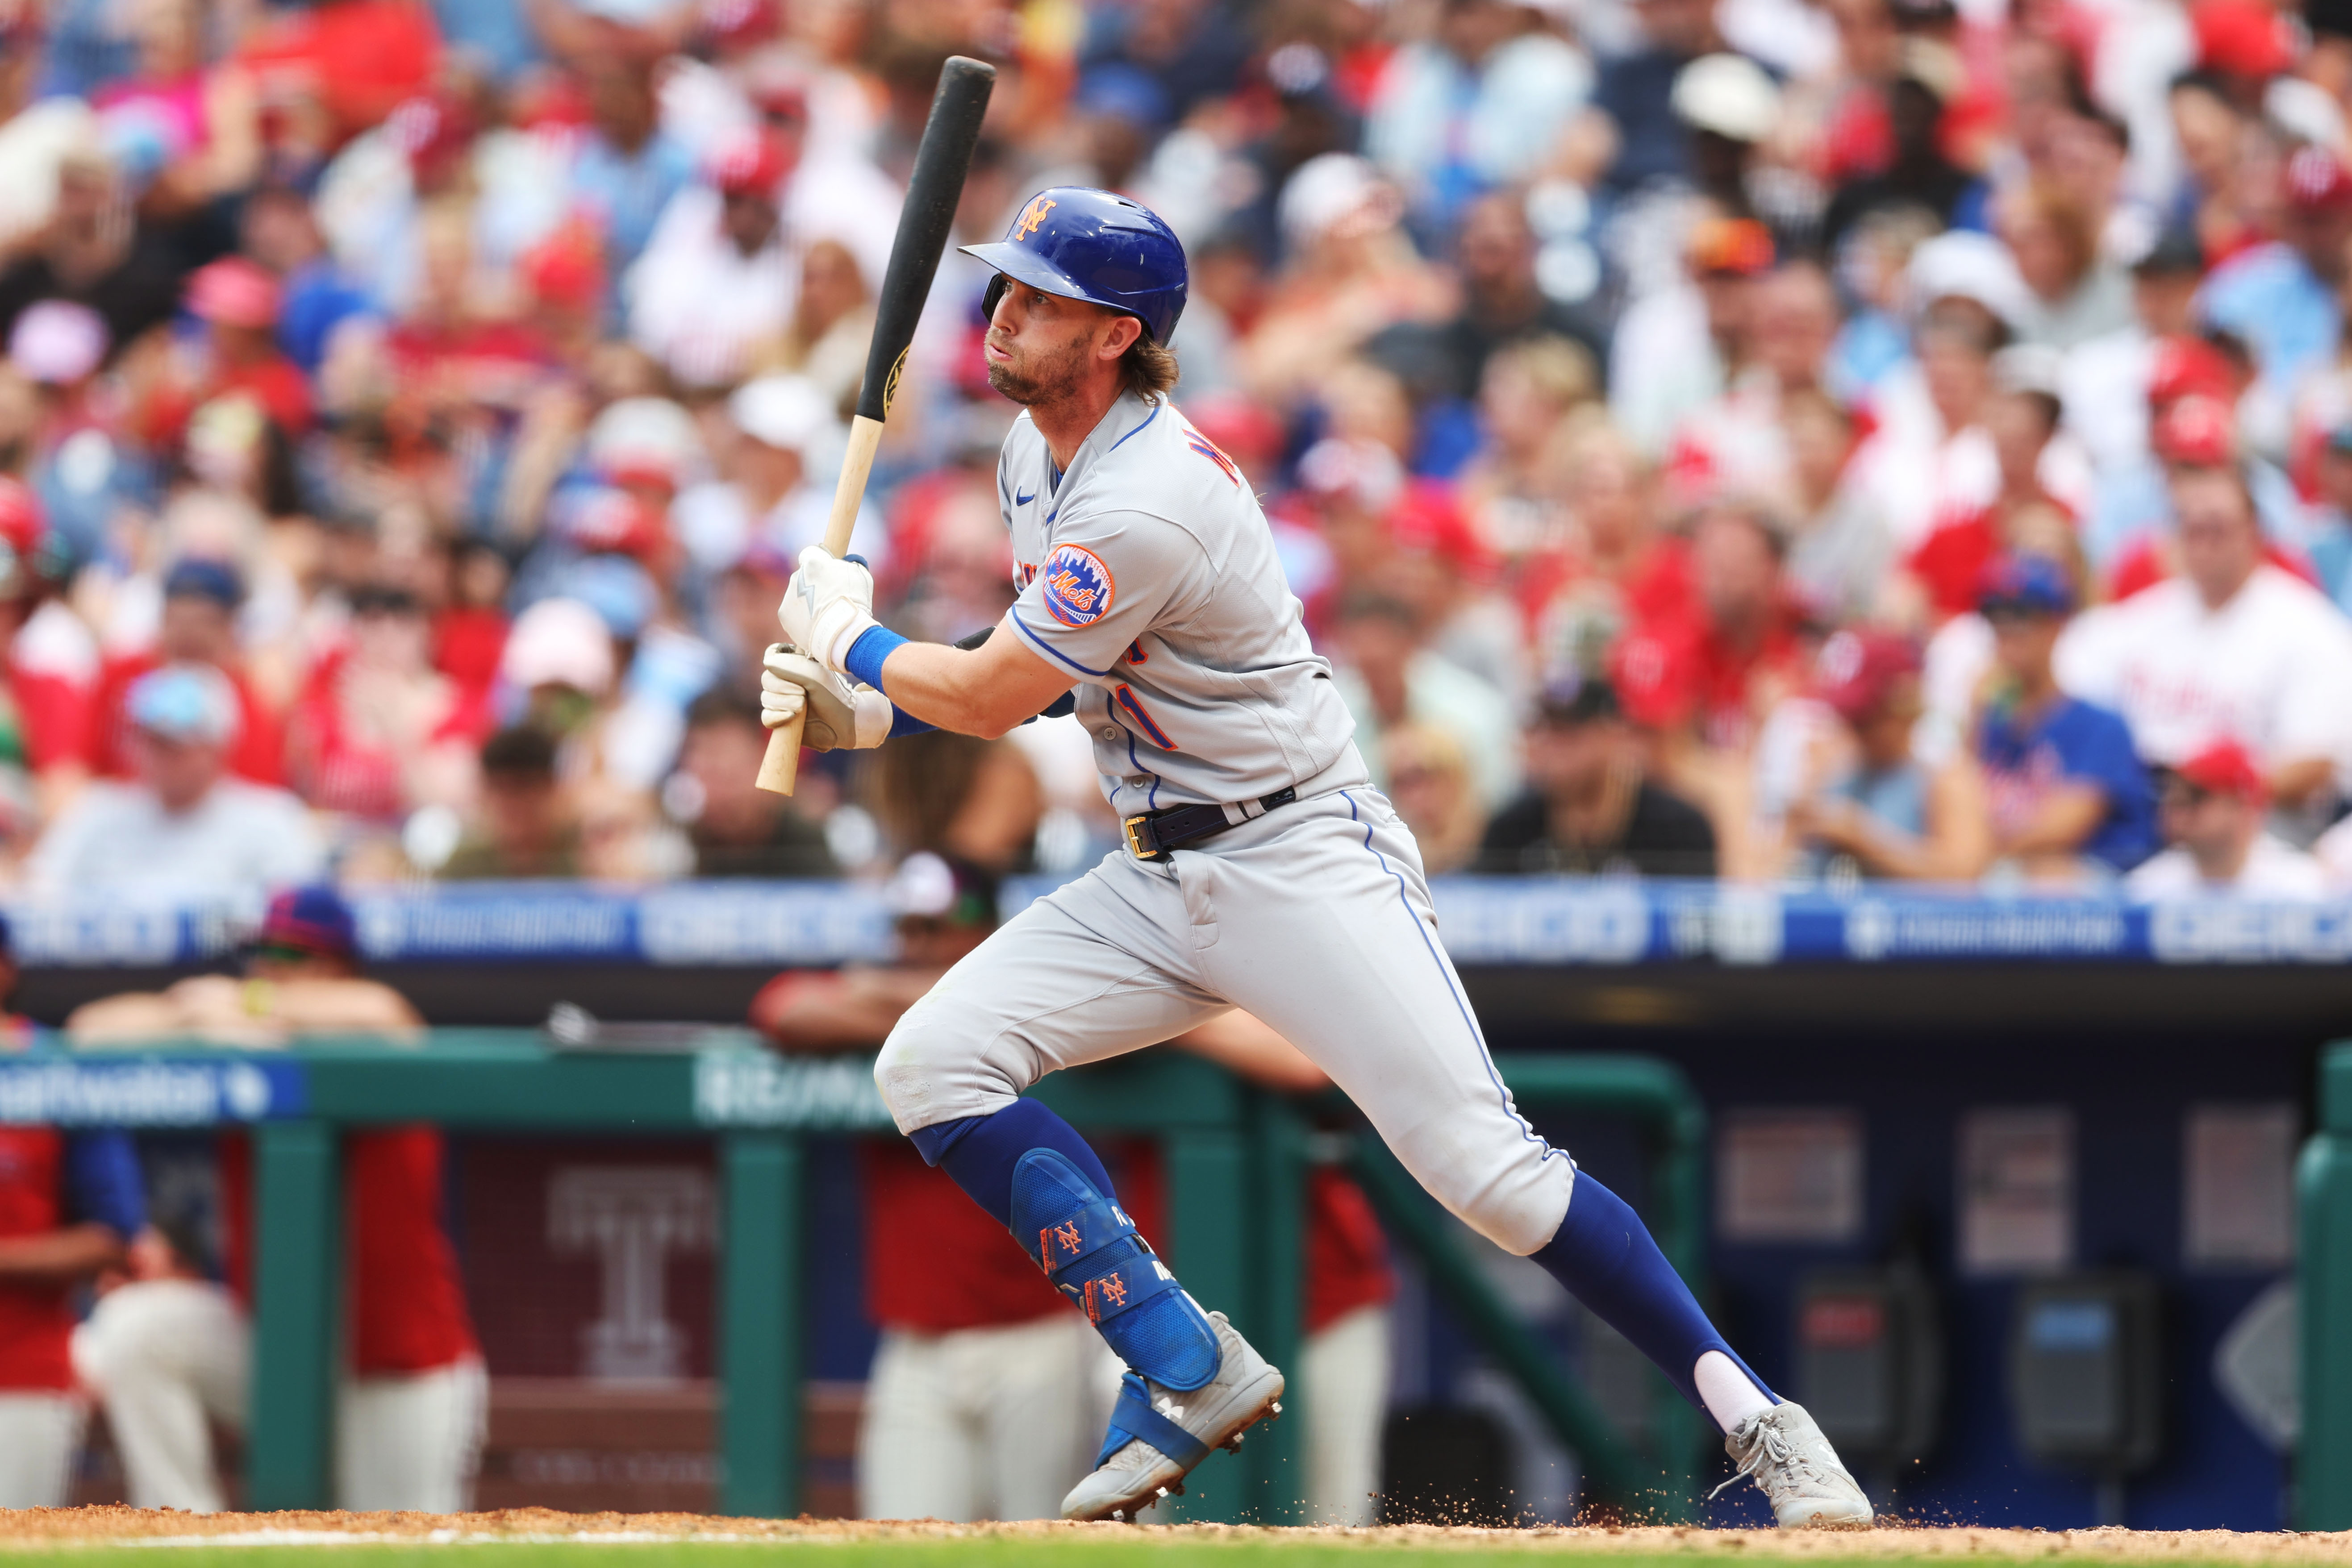 Jeff McNeil making his mark with NY Mets